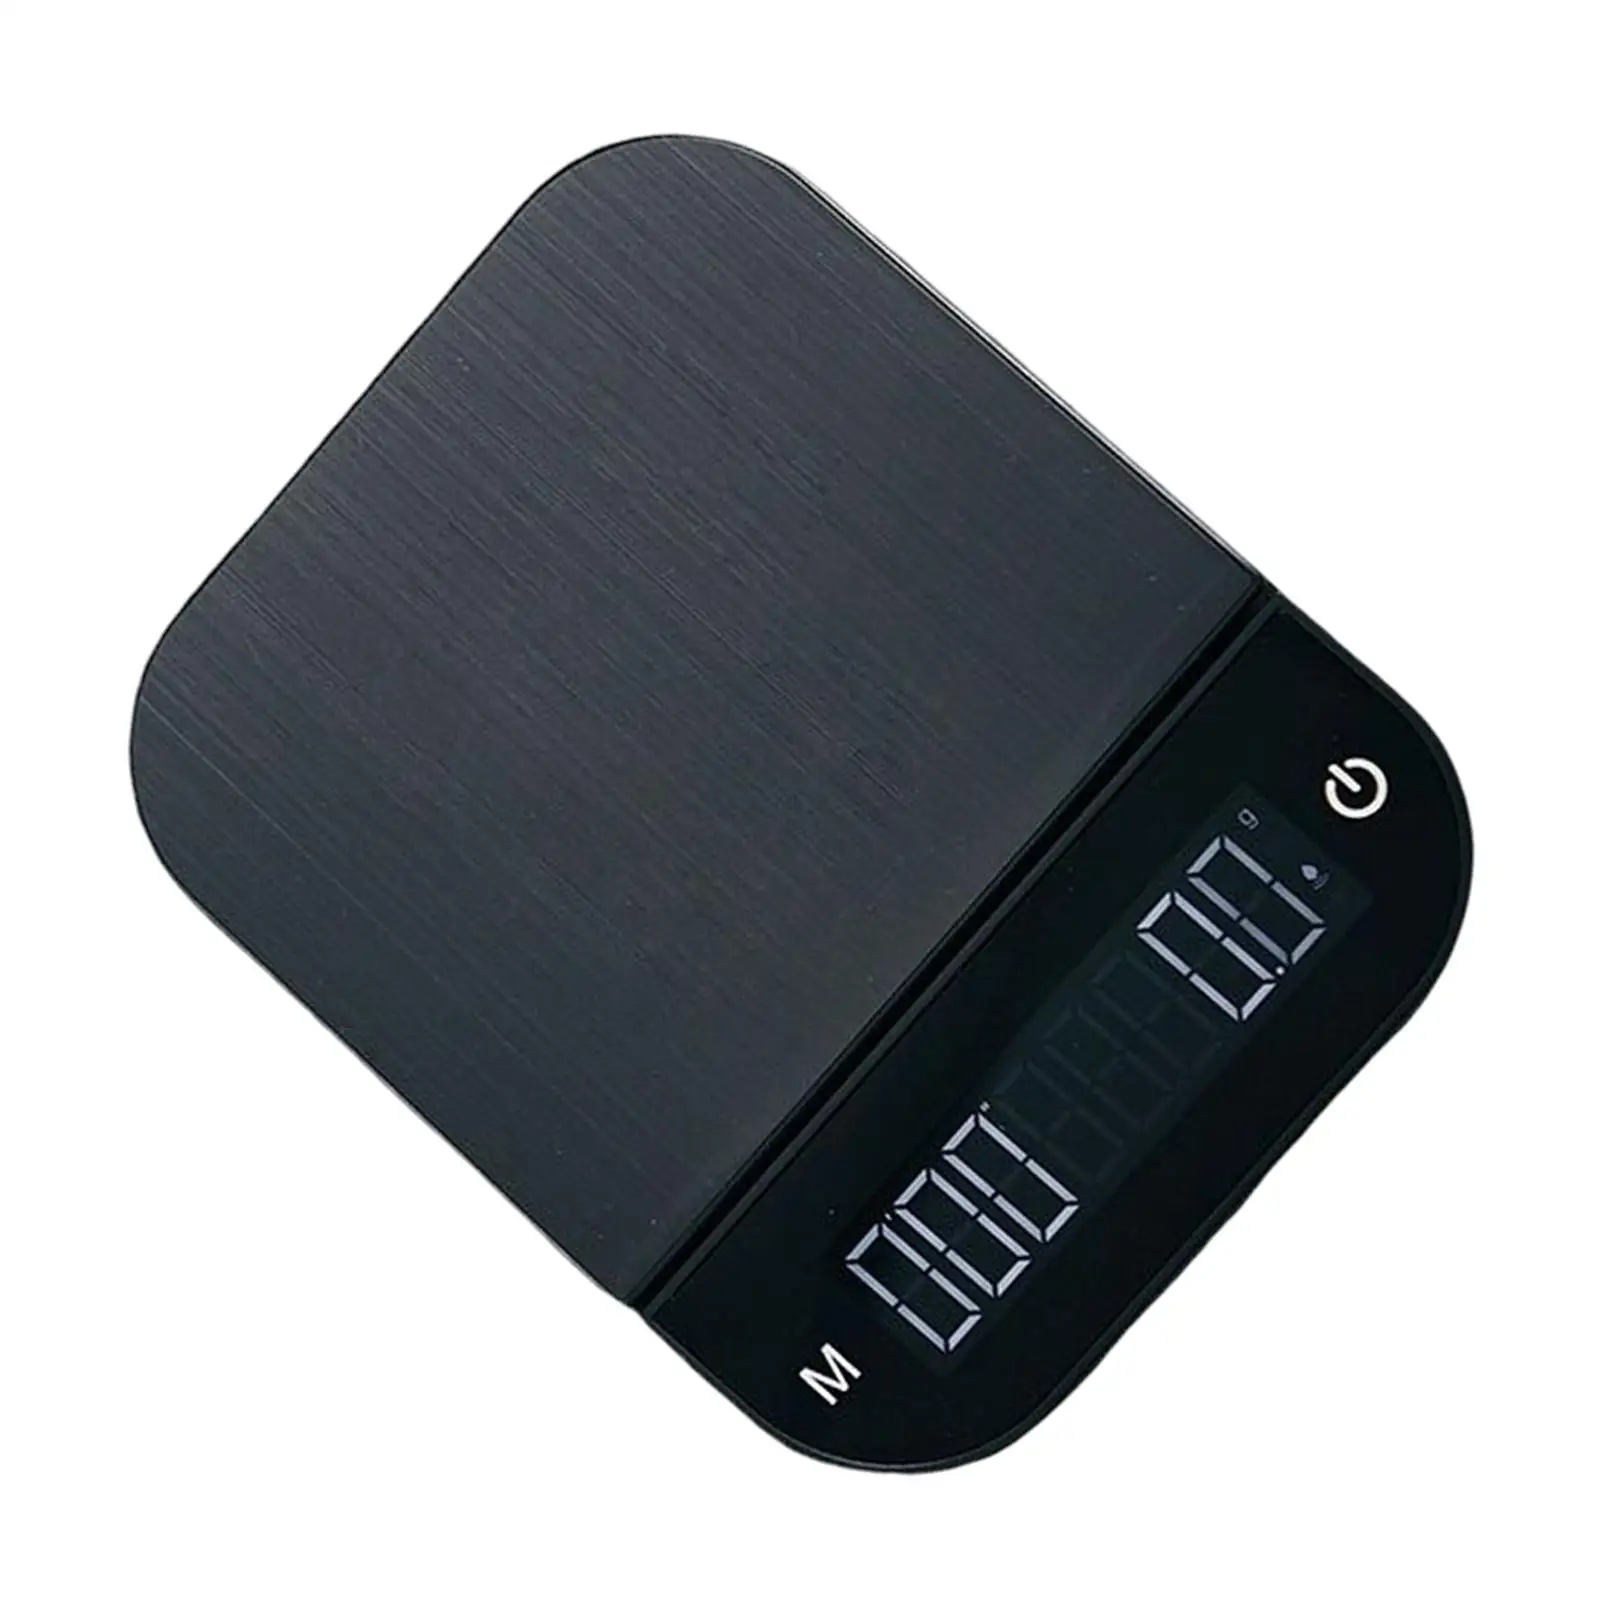 Pocket Scale Portable Electronic Precision Stainless Steel High Precision Digital Scale Electronic, for Household Laboratories